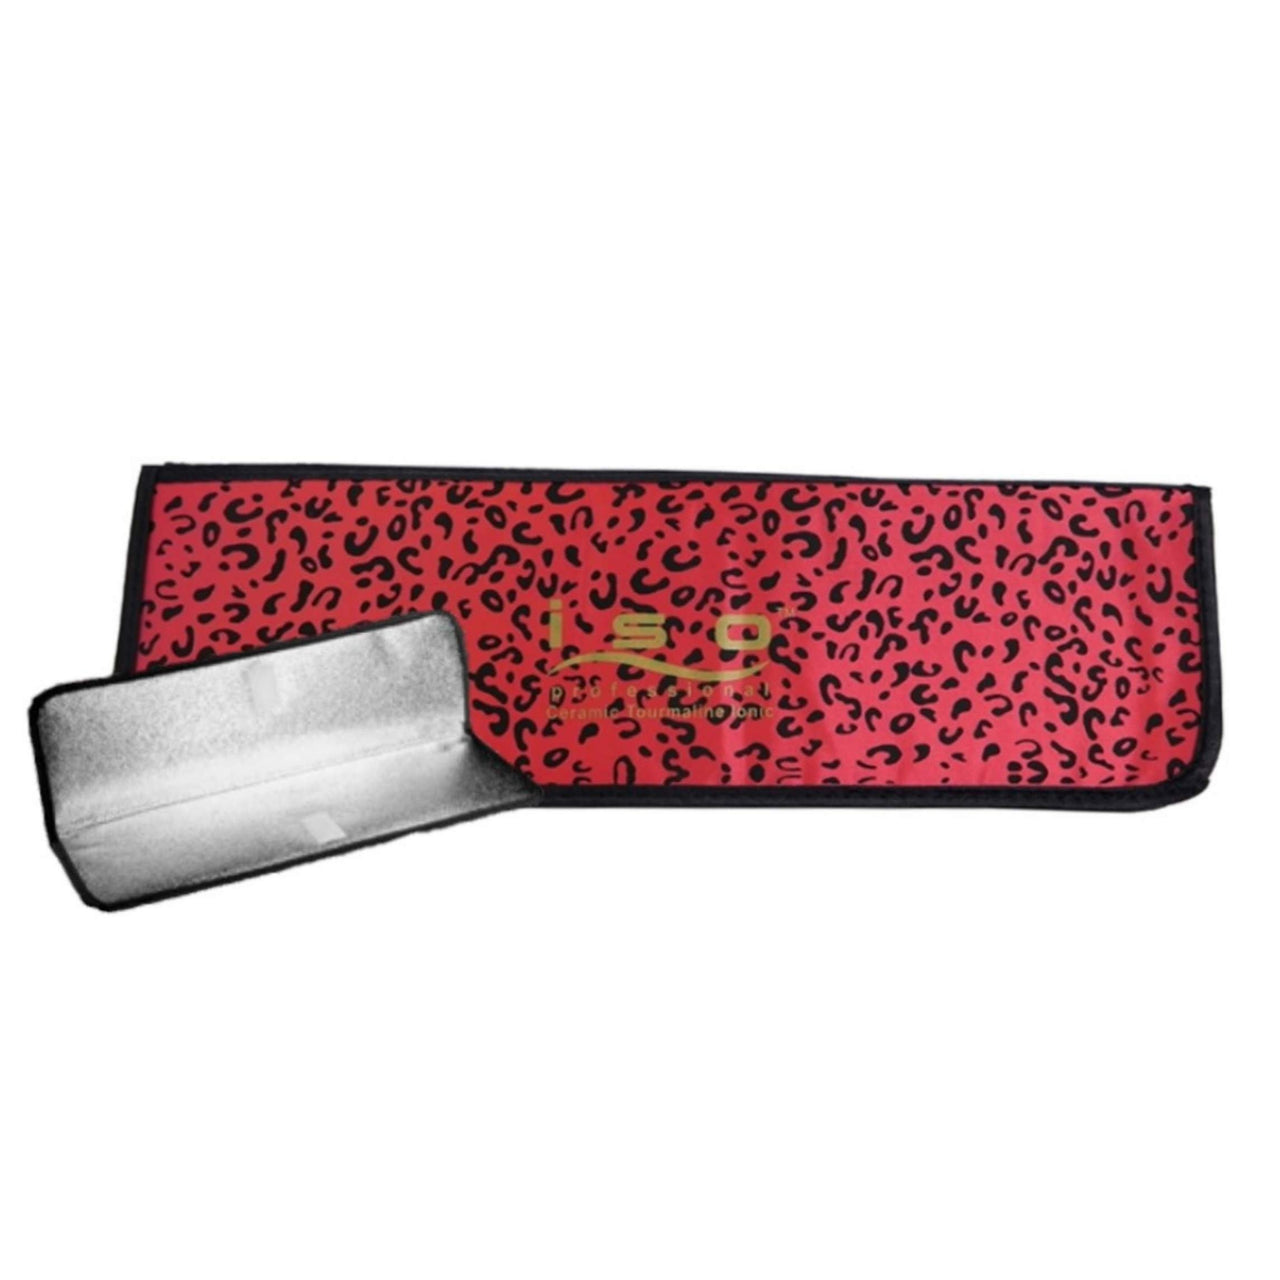 Heat Protective Mat Soft Touch Felt Exterior Velcro Closure for Easy Travel - Red Leopard